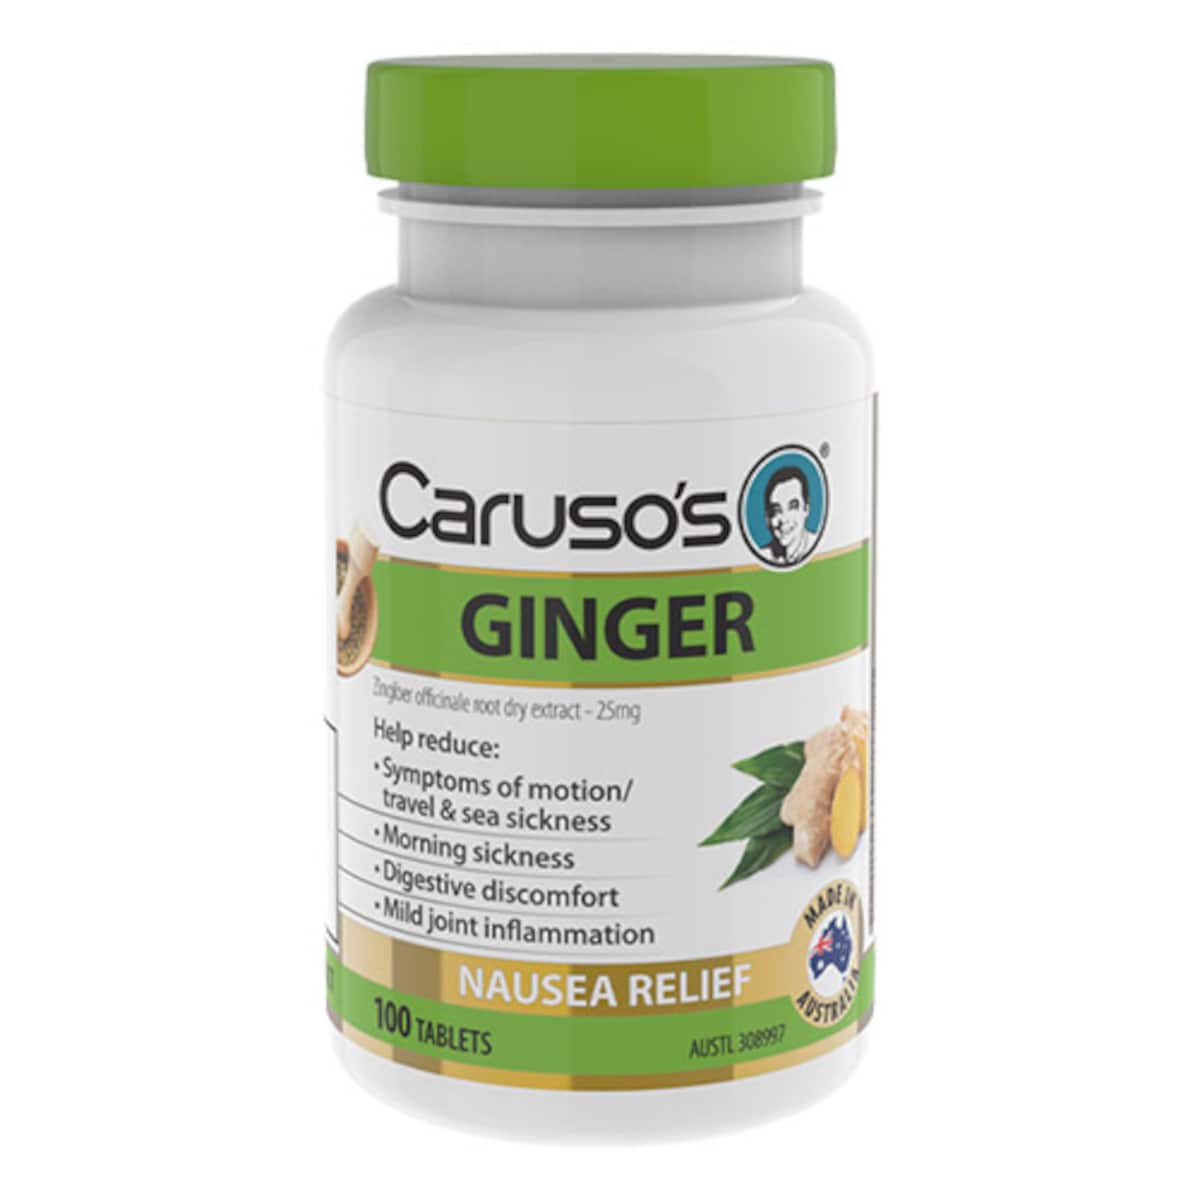 Carusos Ginger Nausea Relief 100 Tablets Australia